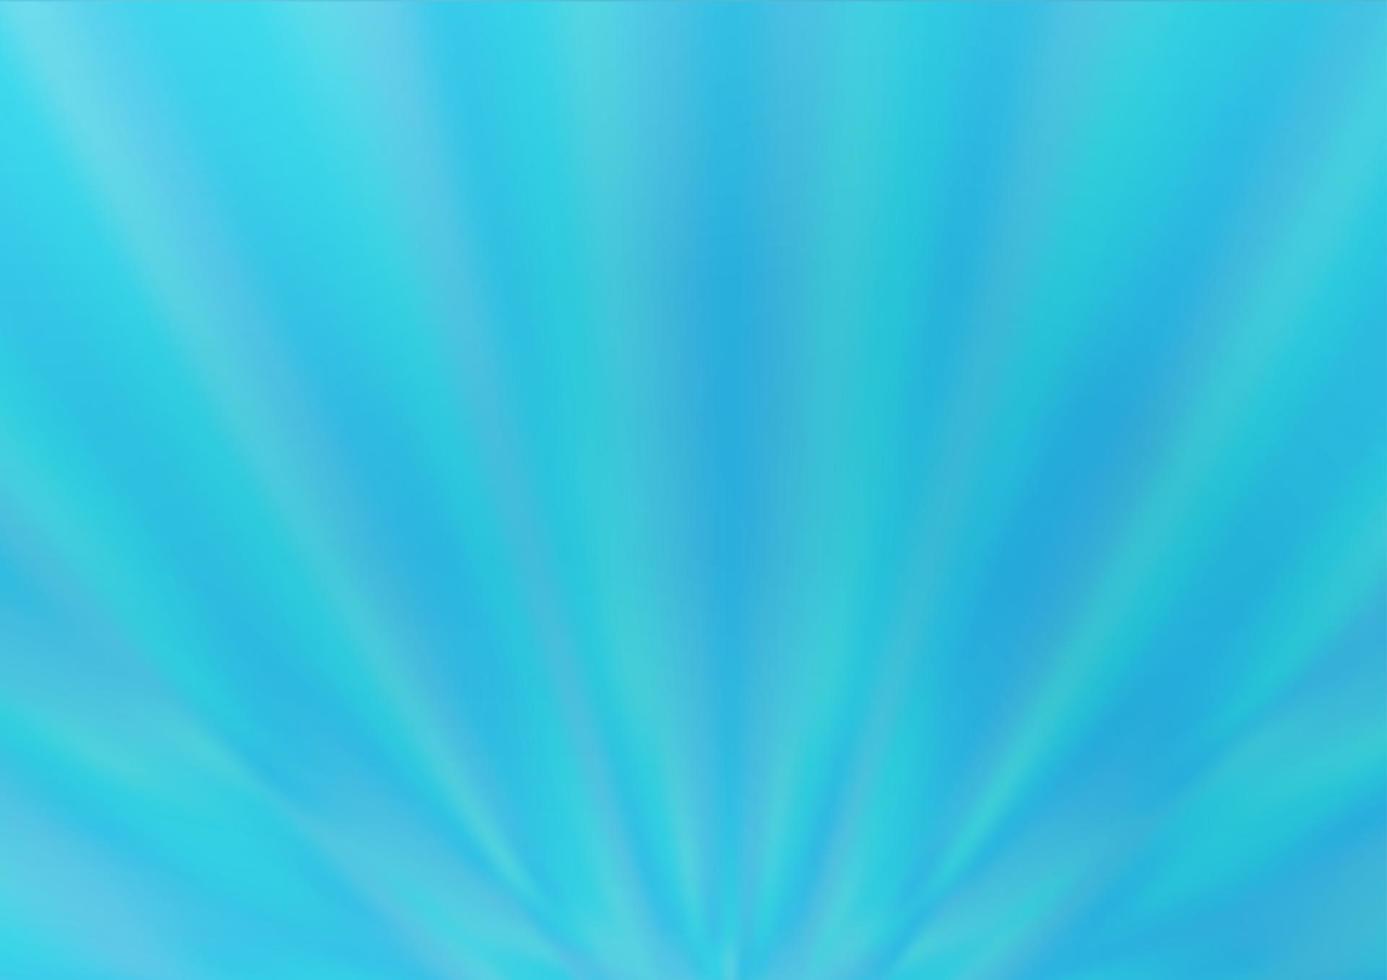 Light BLUE vector abstract background.